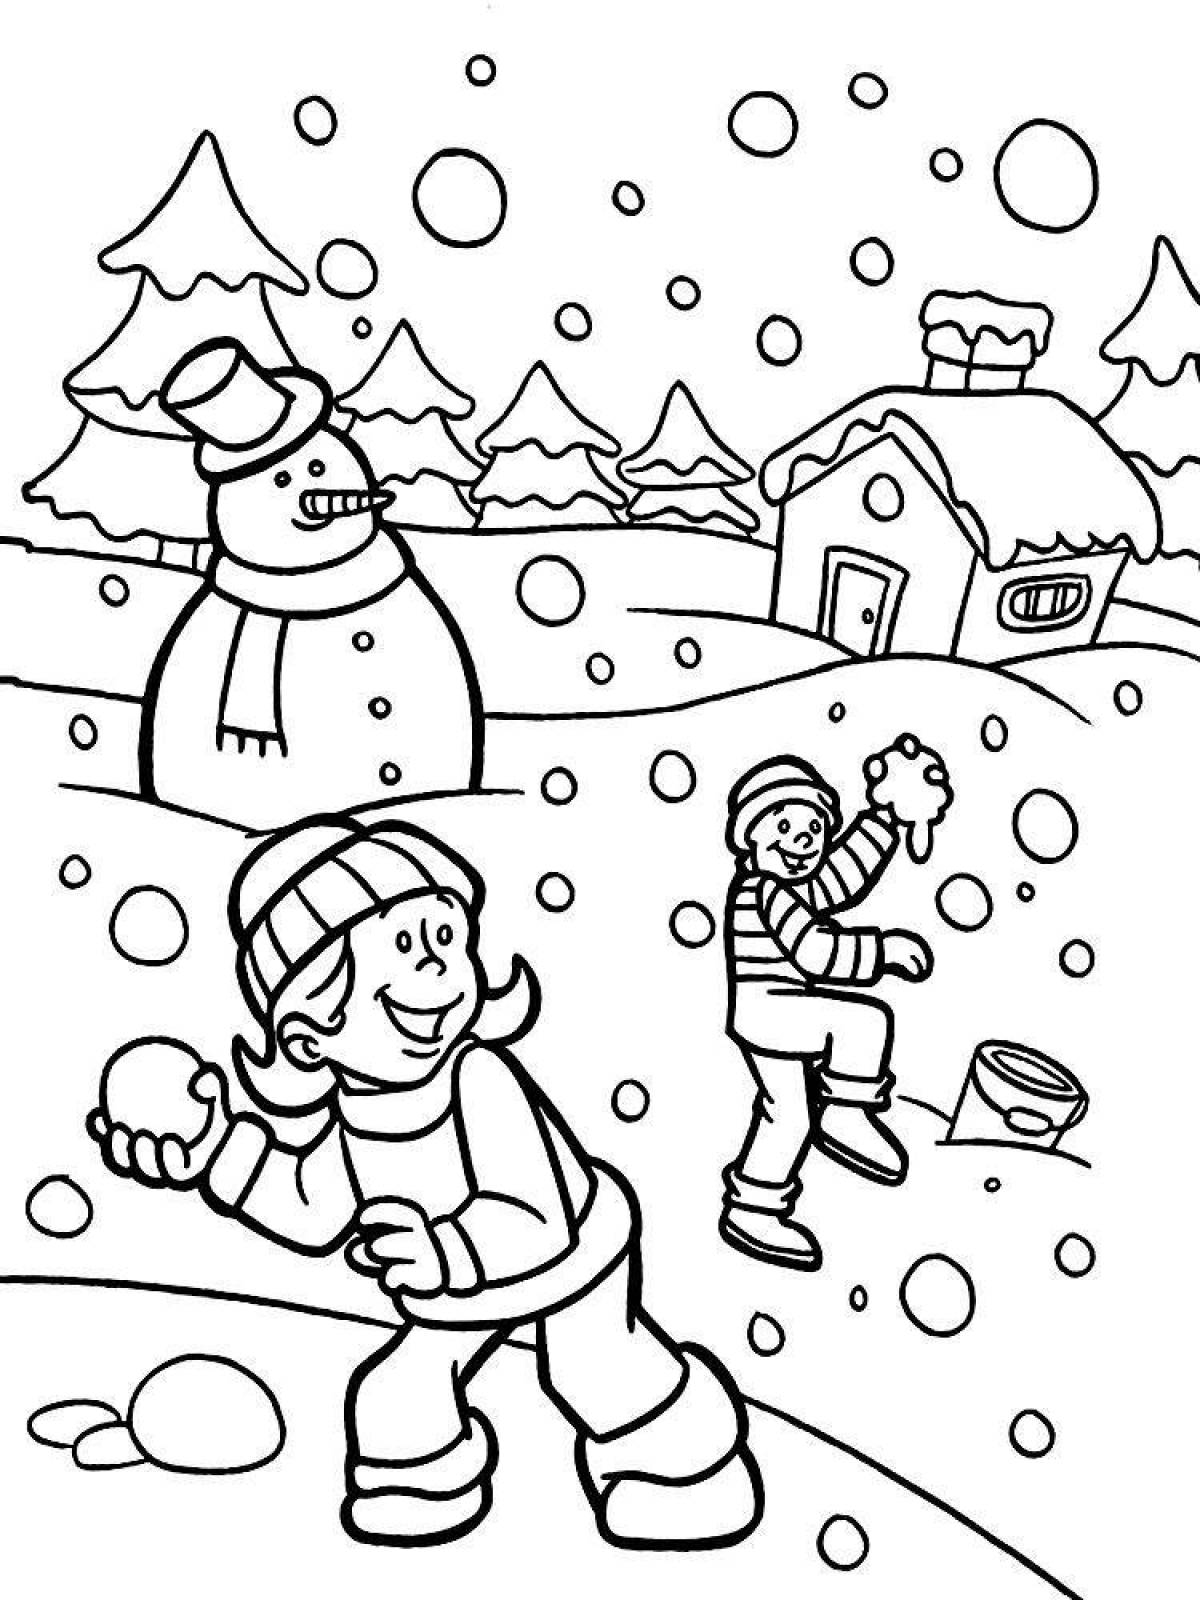 Joyful winter coloring book for children 4-6 years old